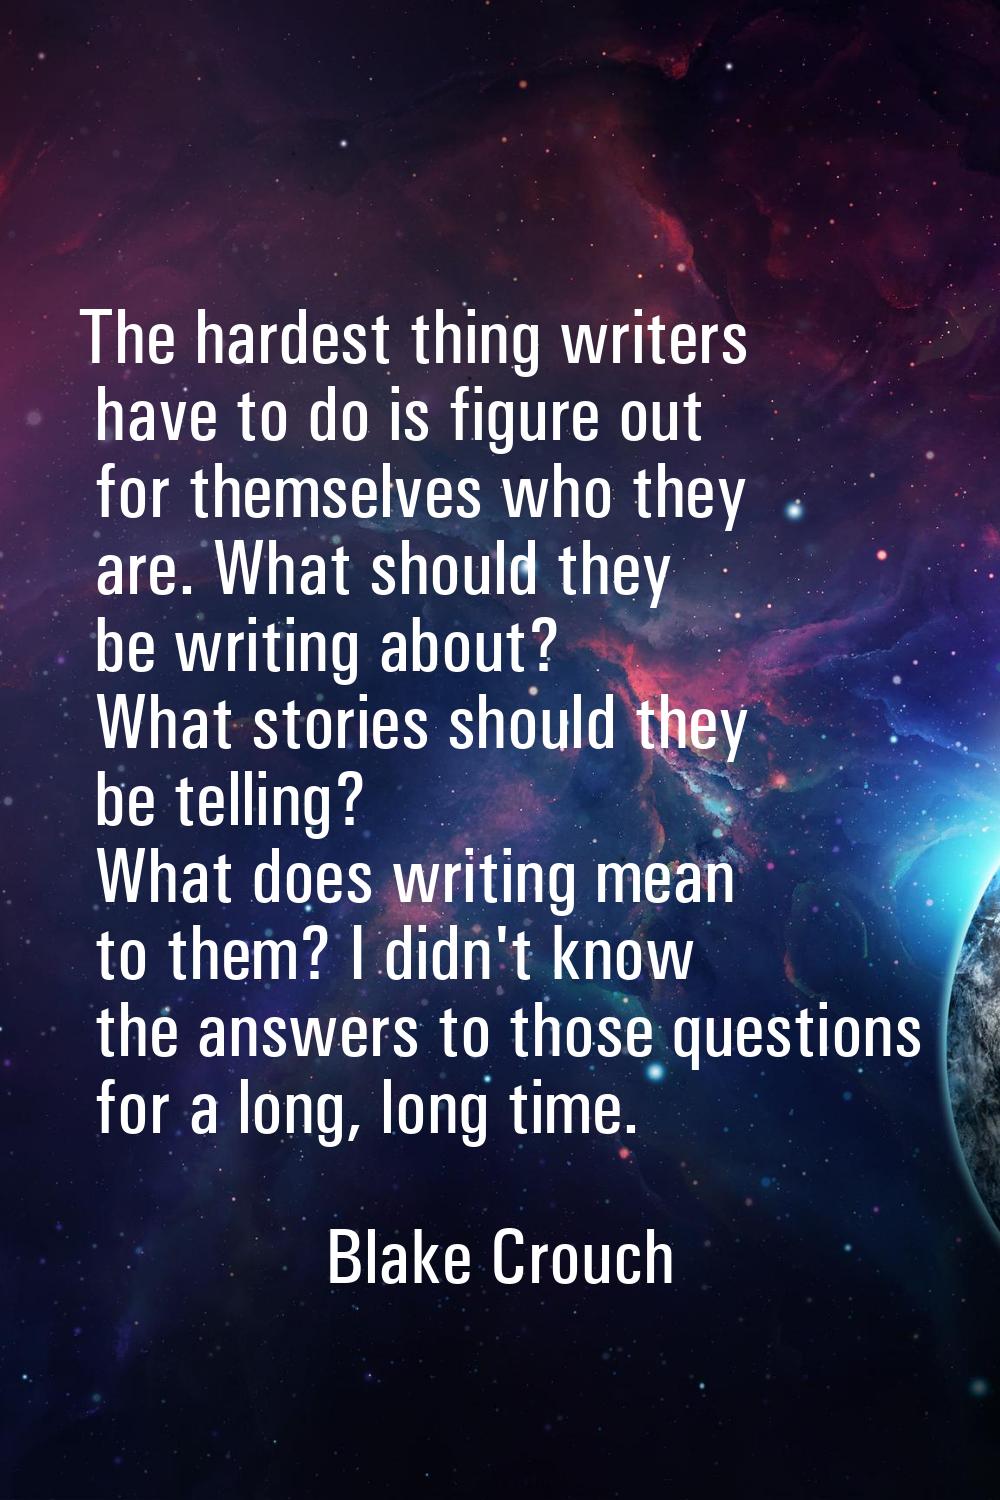 The hardest thing writers have to do is figure out for themselves who they are. What should they be